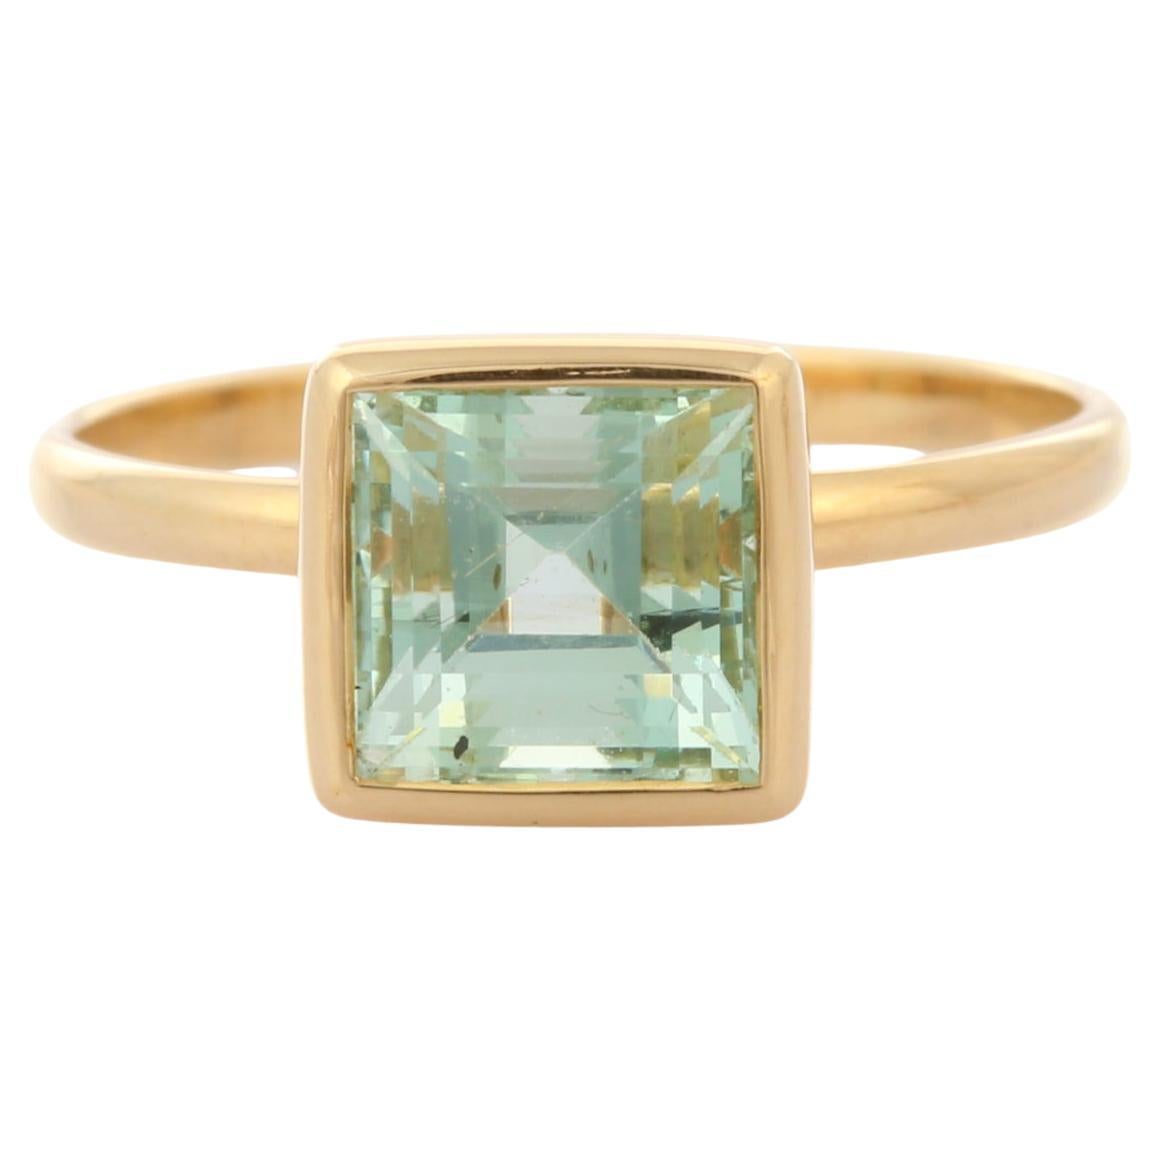 For Sale:  Natural Aquamarine Square Cut Gemstone Ring in 18K Yellow Gold